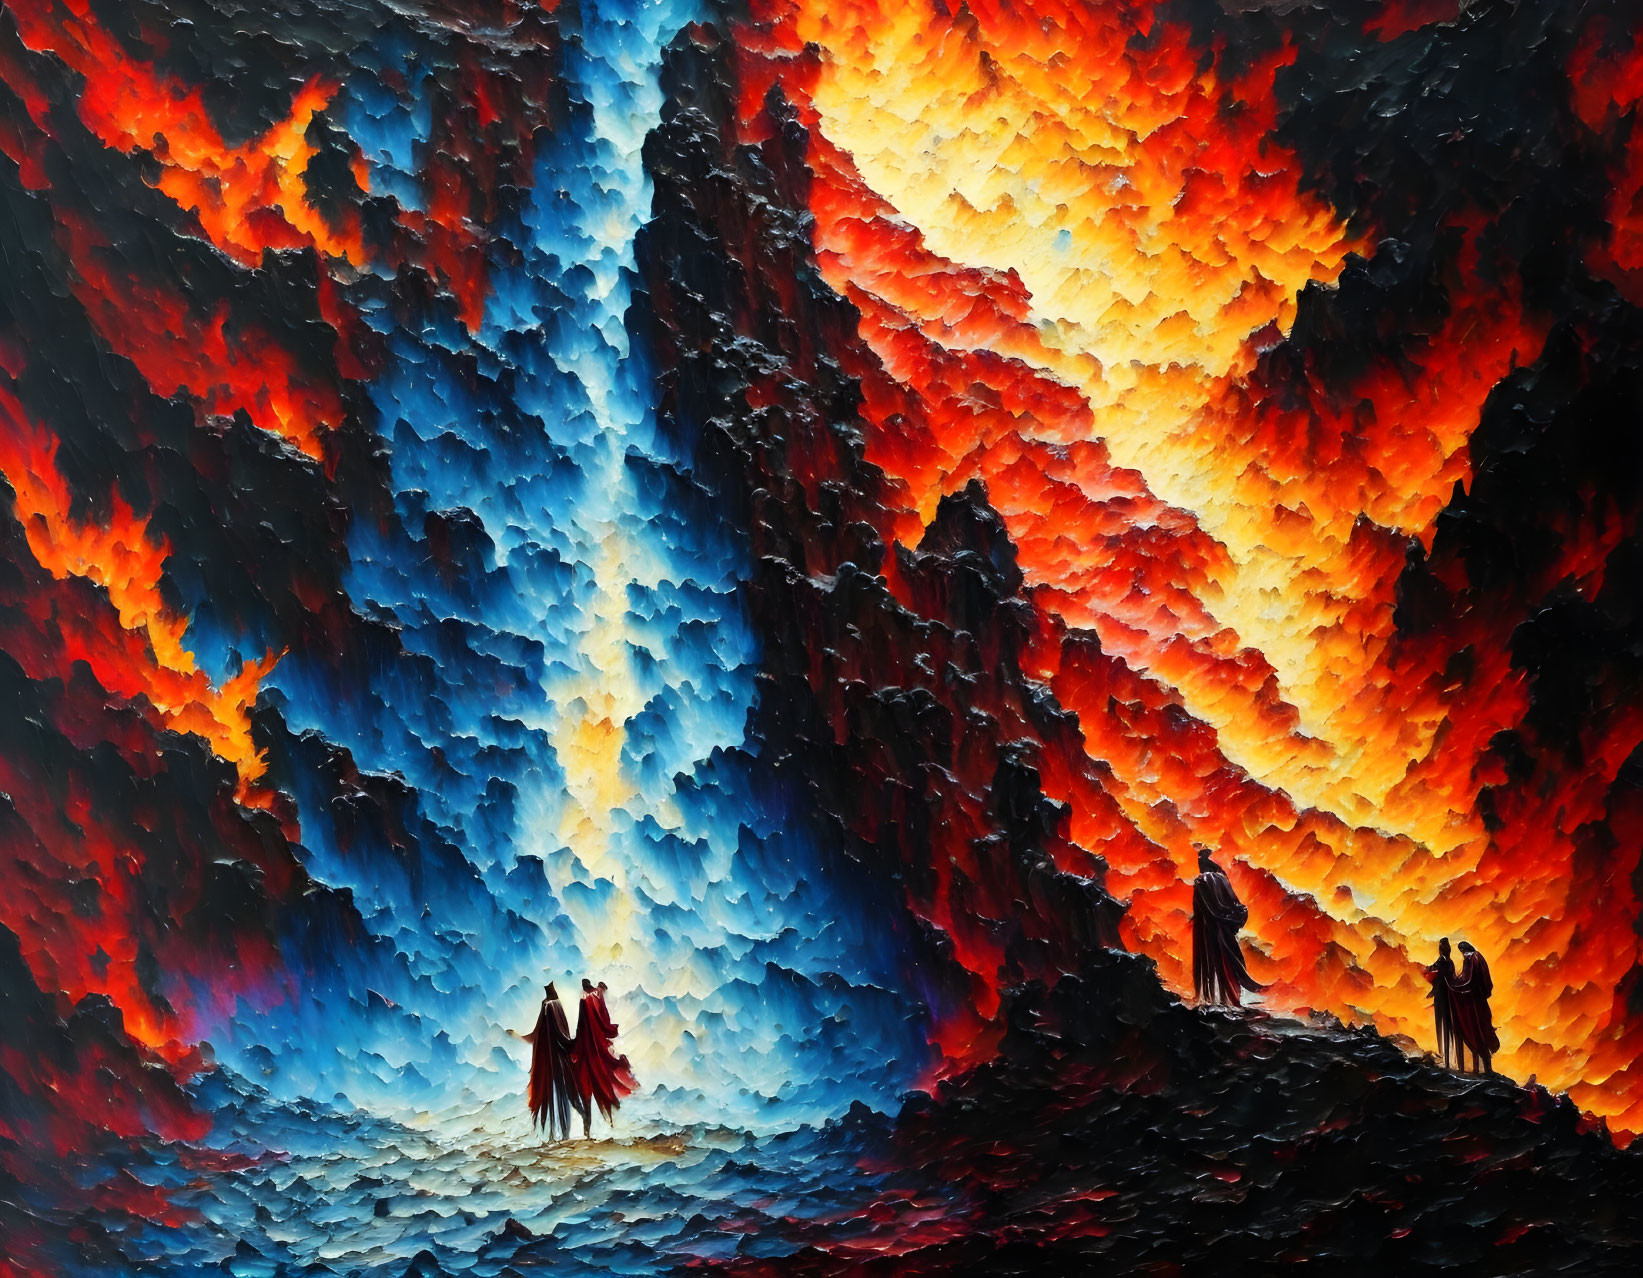 Colorful Abstract Painting of Figures Under Dramatic Sky